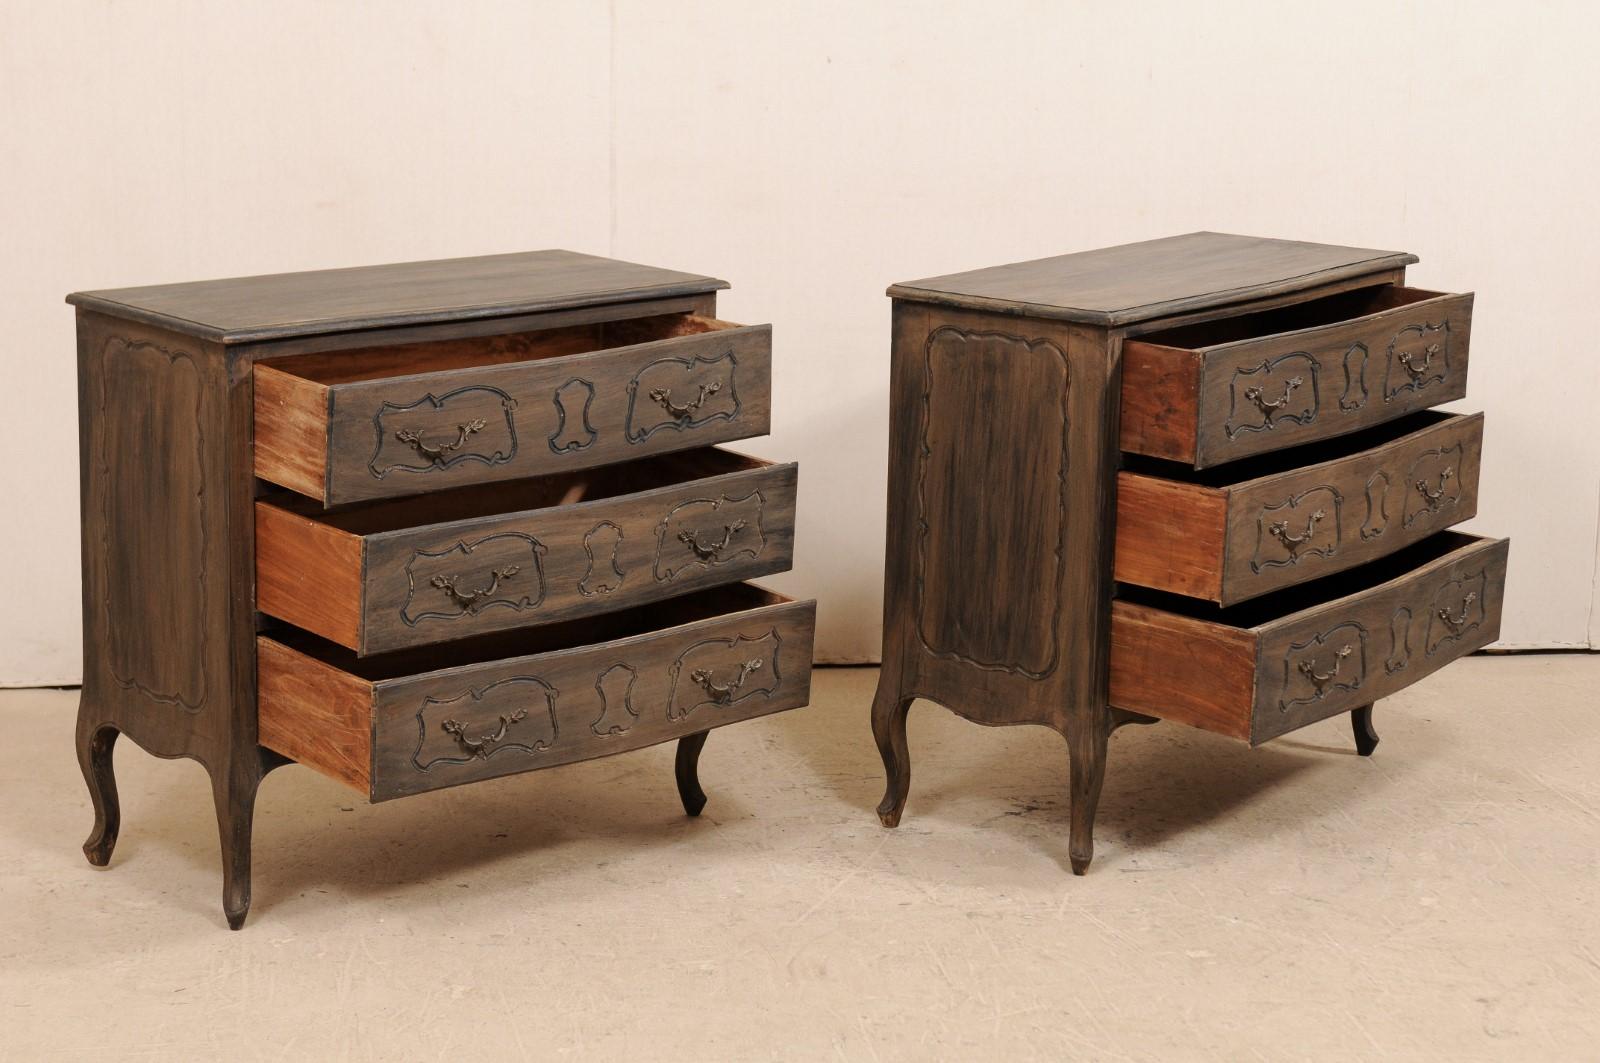 Pair of Mid-20th Century Painted and Carved Wood Chests on Cabriole Legs 2